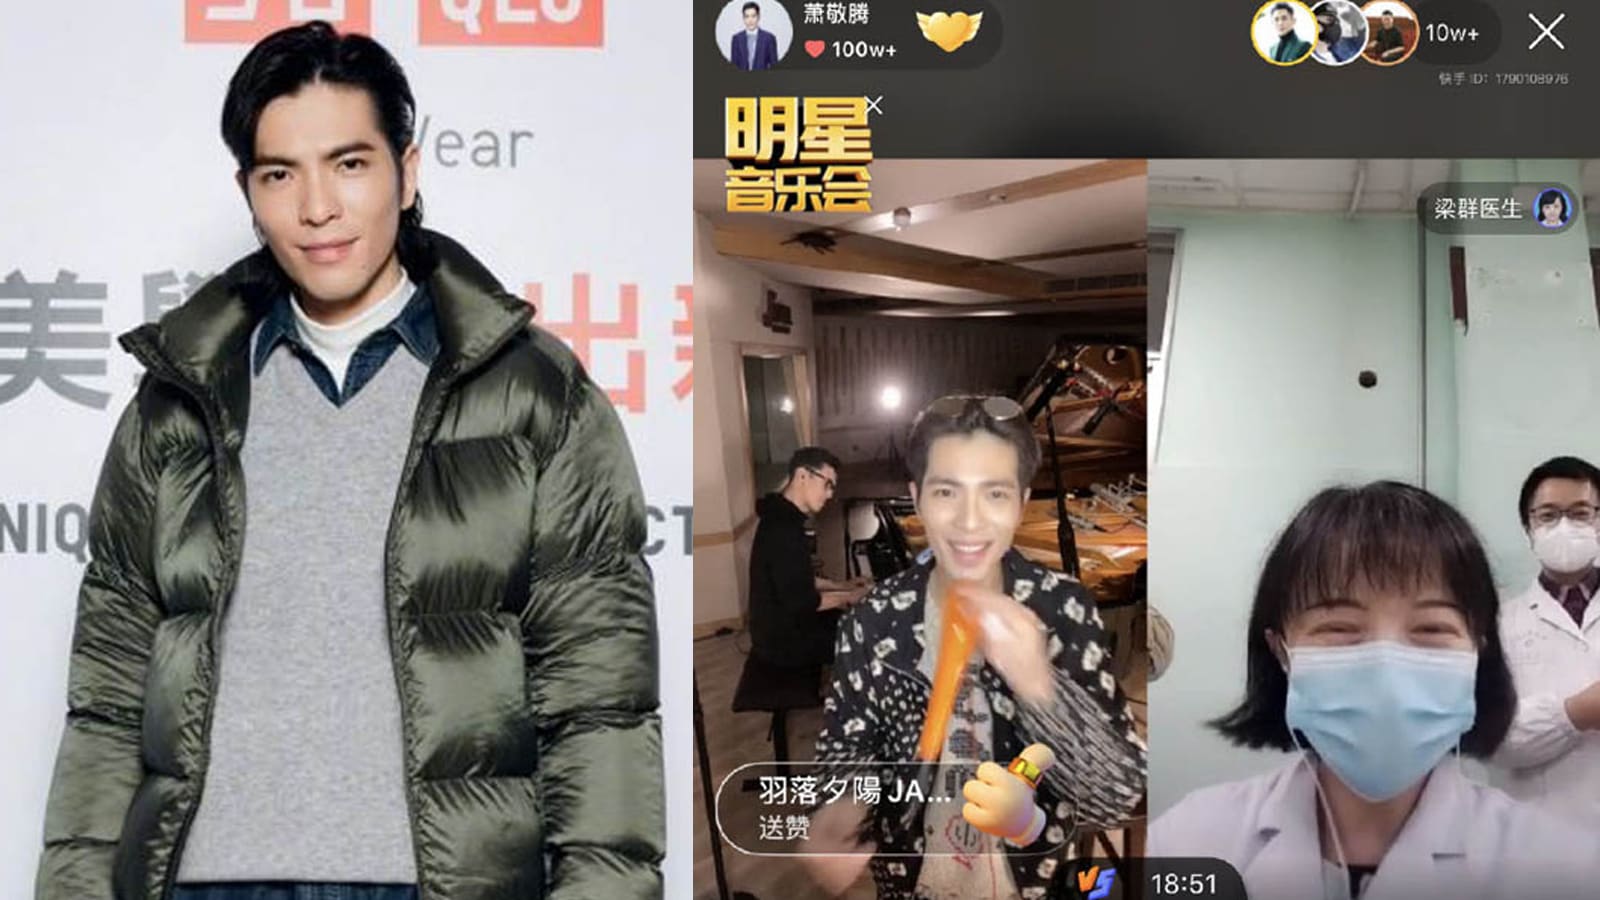 Jam Hsiao Live Streamed His Concert For Free And Helped Raise S$100,000 While Doing So